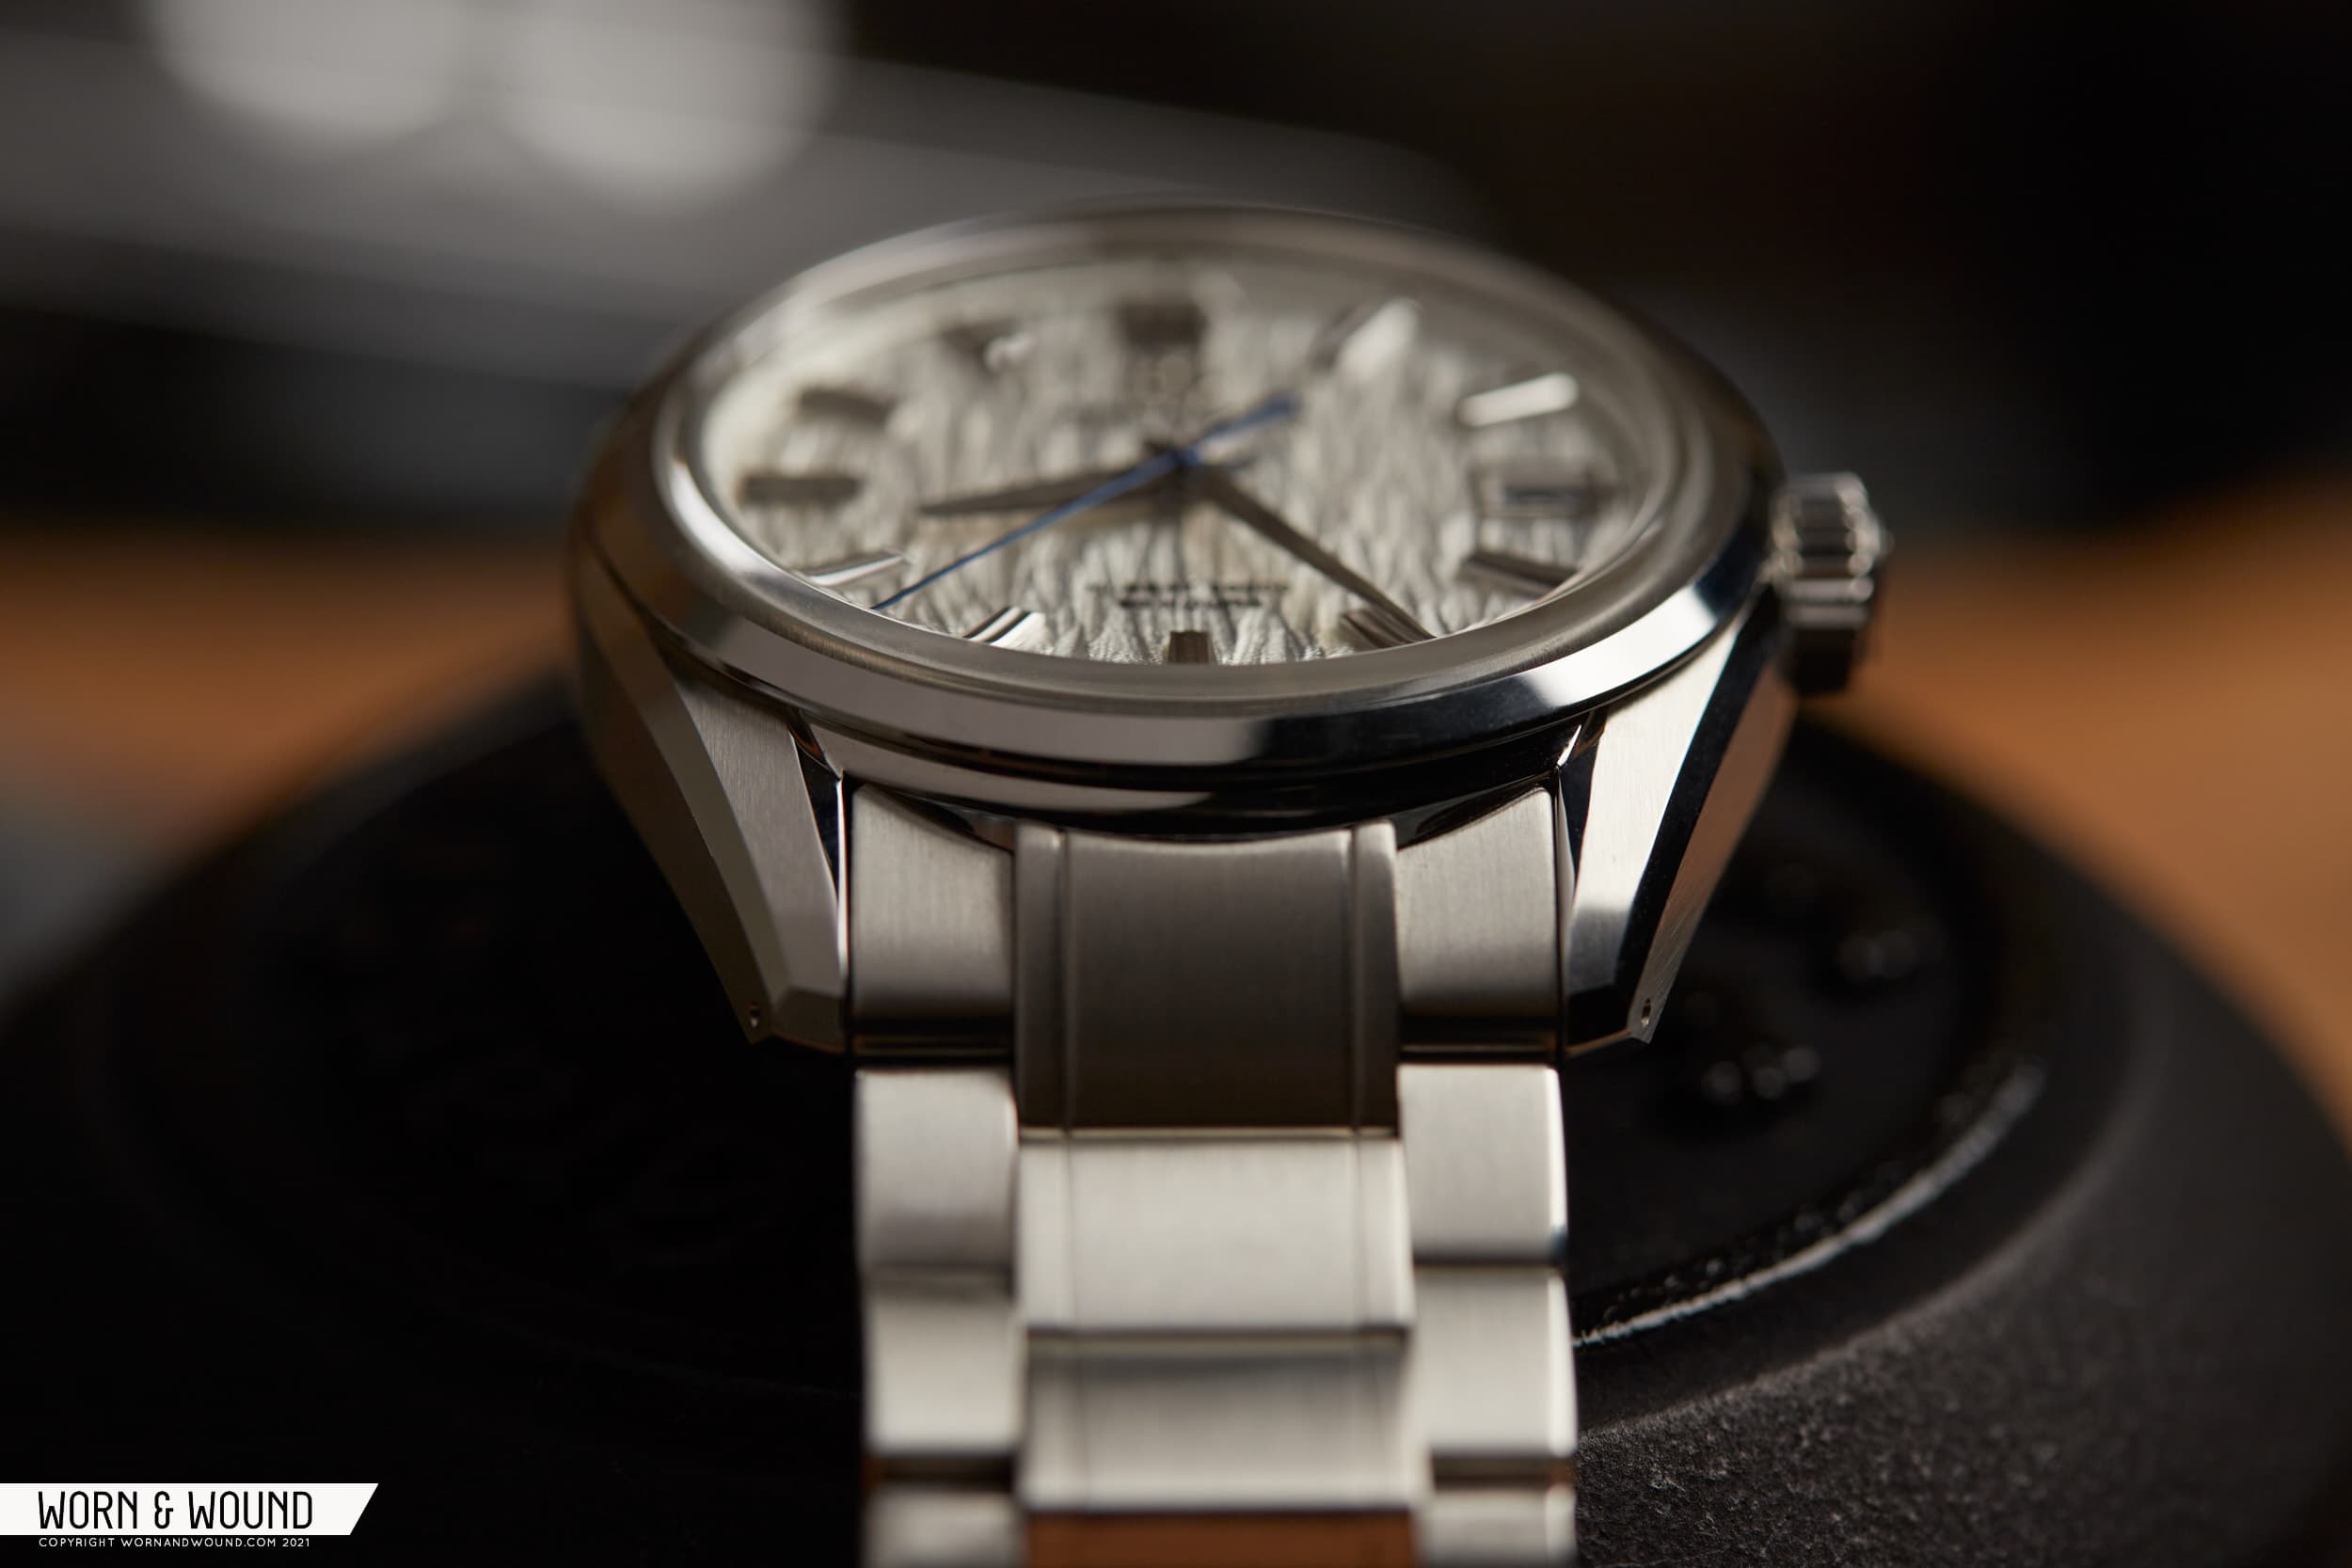 Hands-On with the Grand Seiko SLGH005 